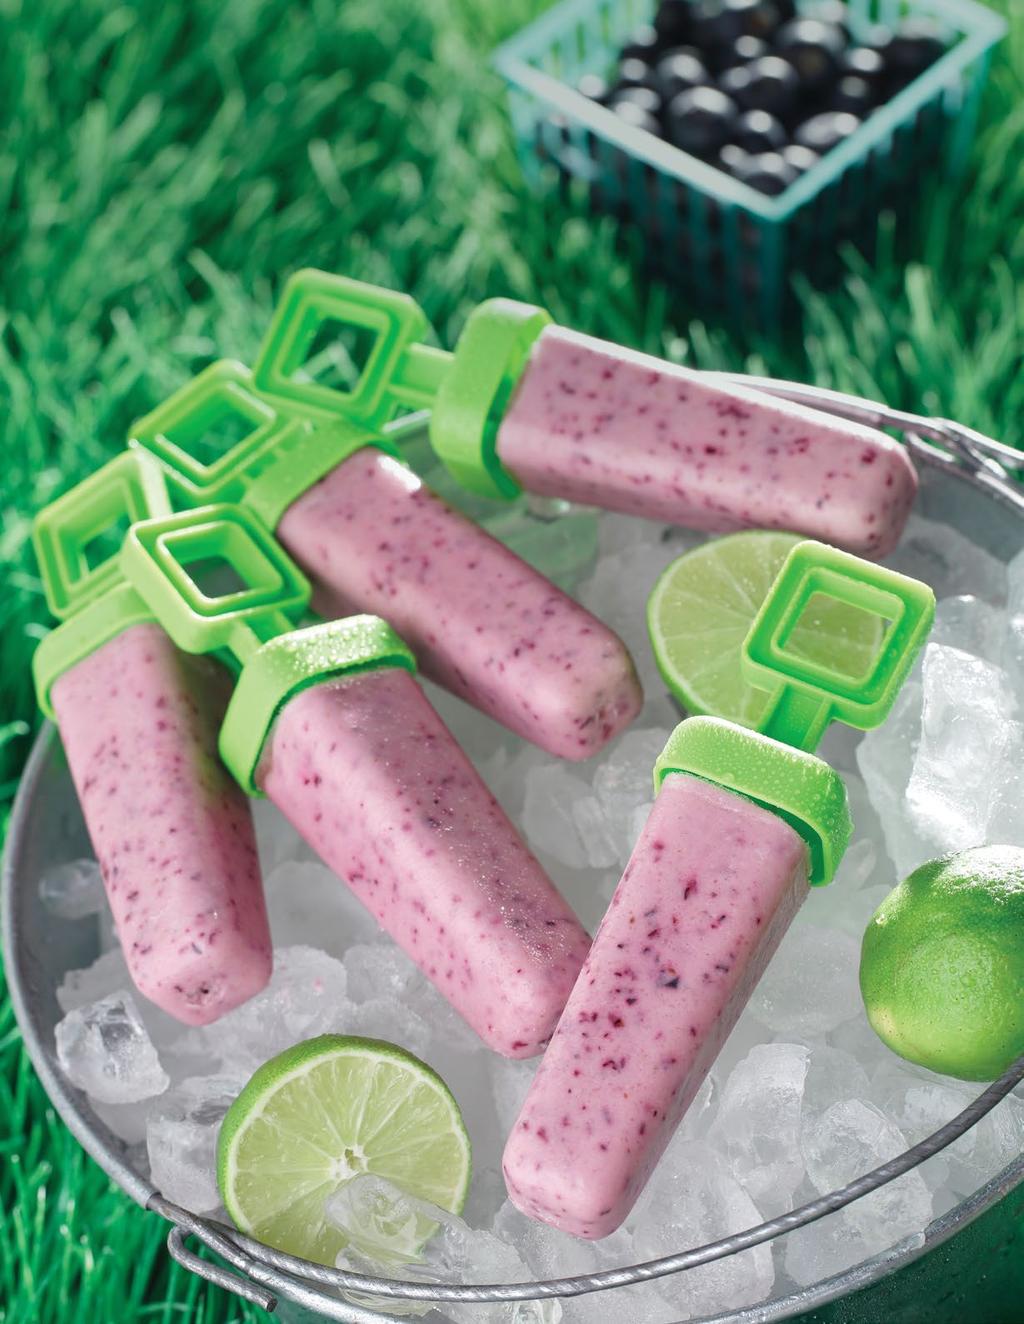 Dessert Creamy Blueberry & Lentil Lime Popsicles SERVINGS 8 PREP TIME 10 minutes + freezing time TOTAL TIME 4-6 hours 1 Tbsp (15 ml) grated ginger 1 cup (250 ml) vanilla Greek yogurt ½ cup (125 ml)